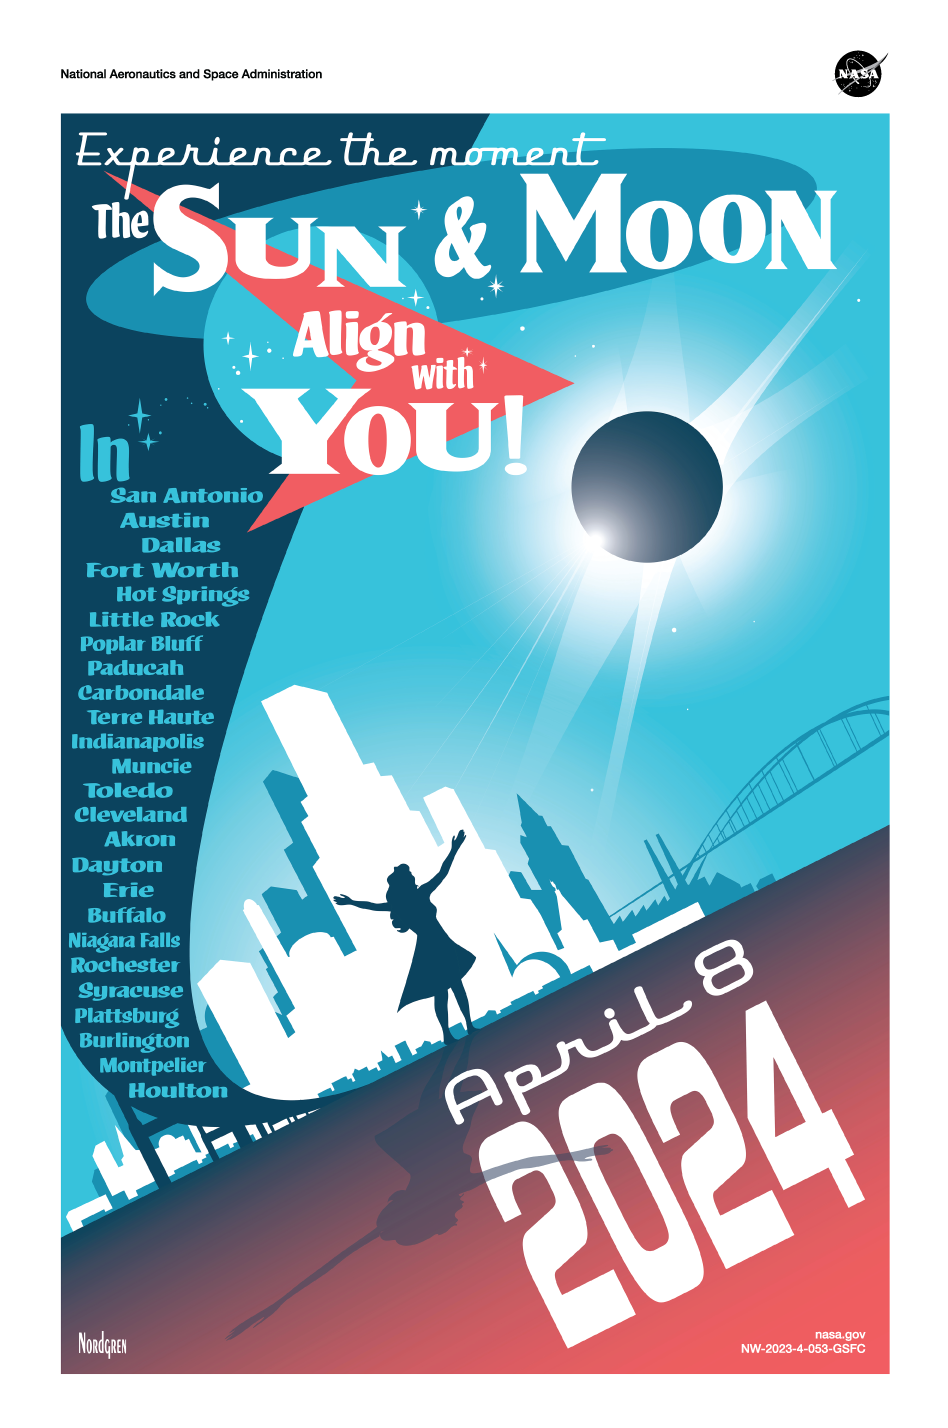 An illustrative poster shows the silhouette of a person with outstretched arms standing in front of a city skyline and looking up at a total solar eclipse in the sky. The top of the poster says “Experience the moment” and “The Sun &amp; Moon Align with You!” The bottom of the poster has the date “April 8, 2024.” Along the left side, the word “In” appears above a list of 25 U.S. cities. The name “Nordgren” appears in the lower left corner.